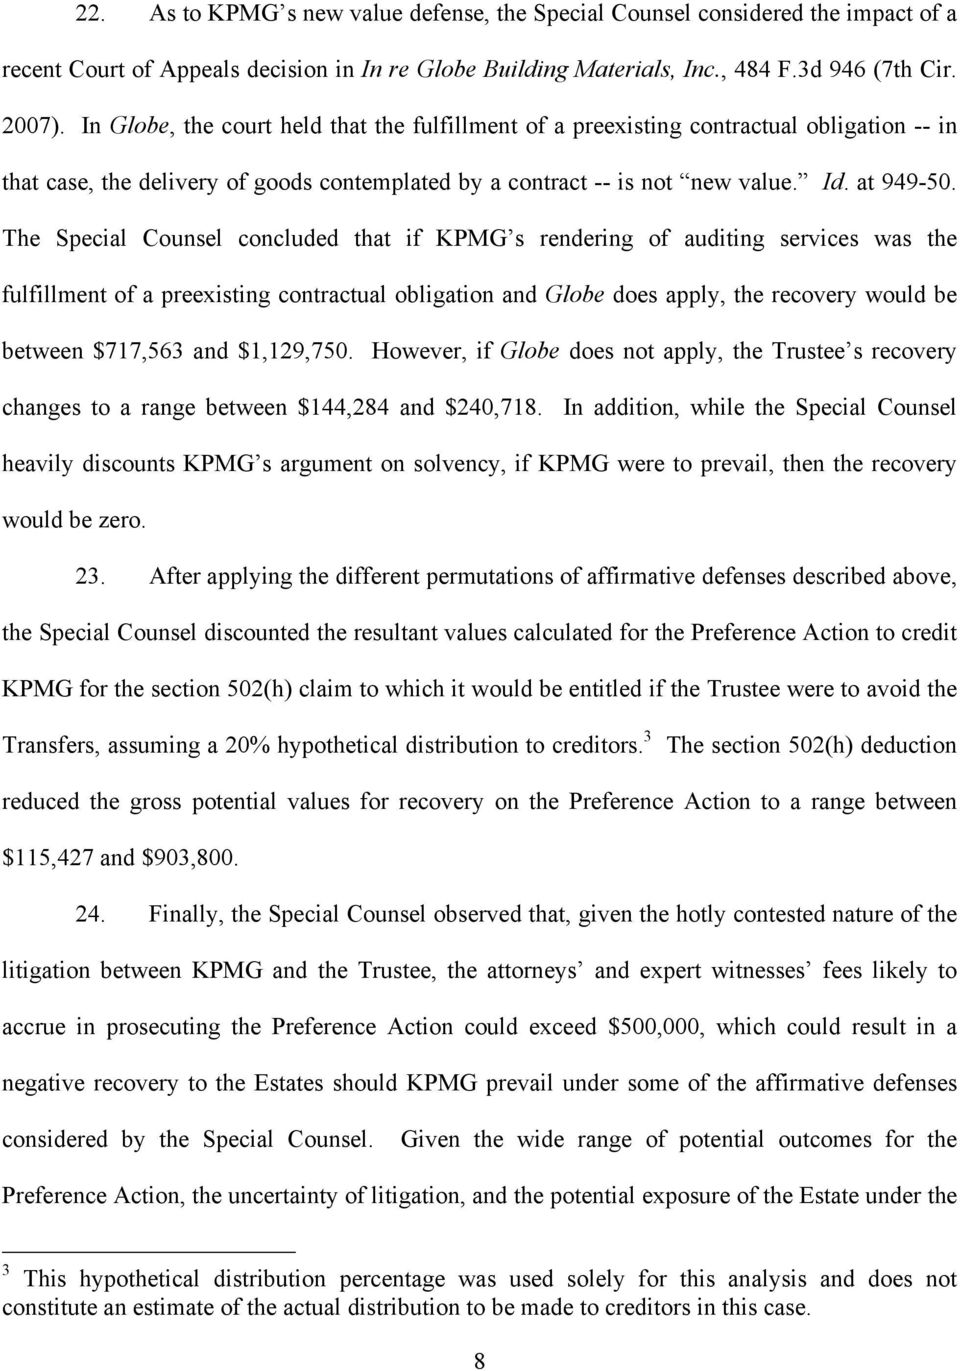 The Special Counsel concluded that if KPMG s rendering of auditing services was the fulfillment of a preexisting contractual obligation and Globe does apply, the recovery would be between $717,563